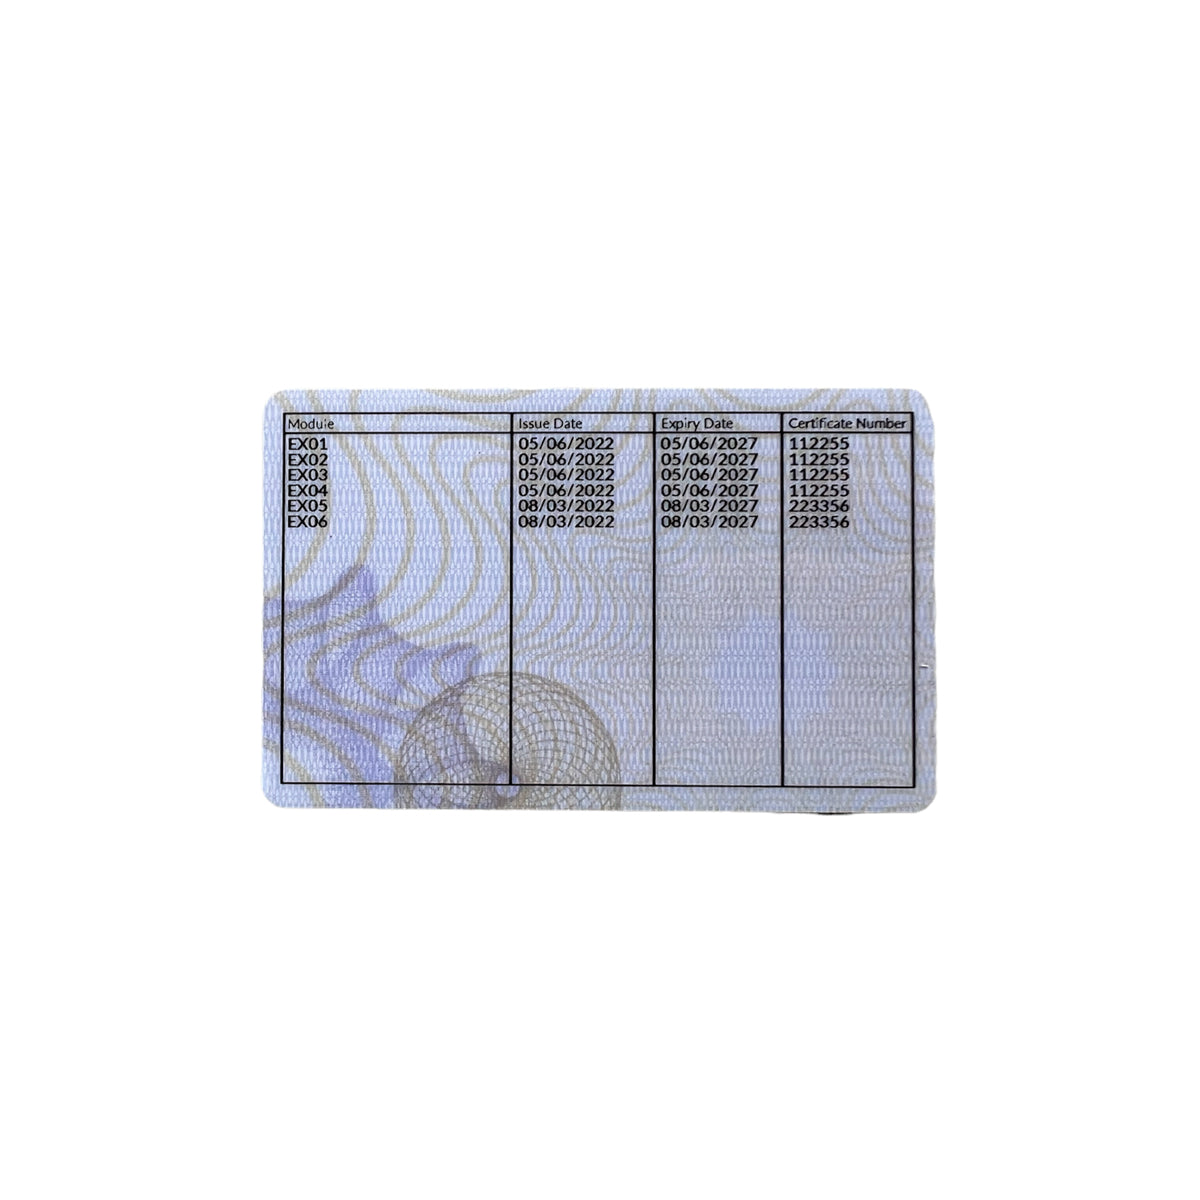 CompEx Replacement ID Card